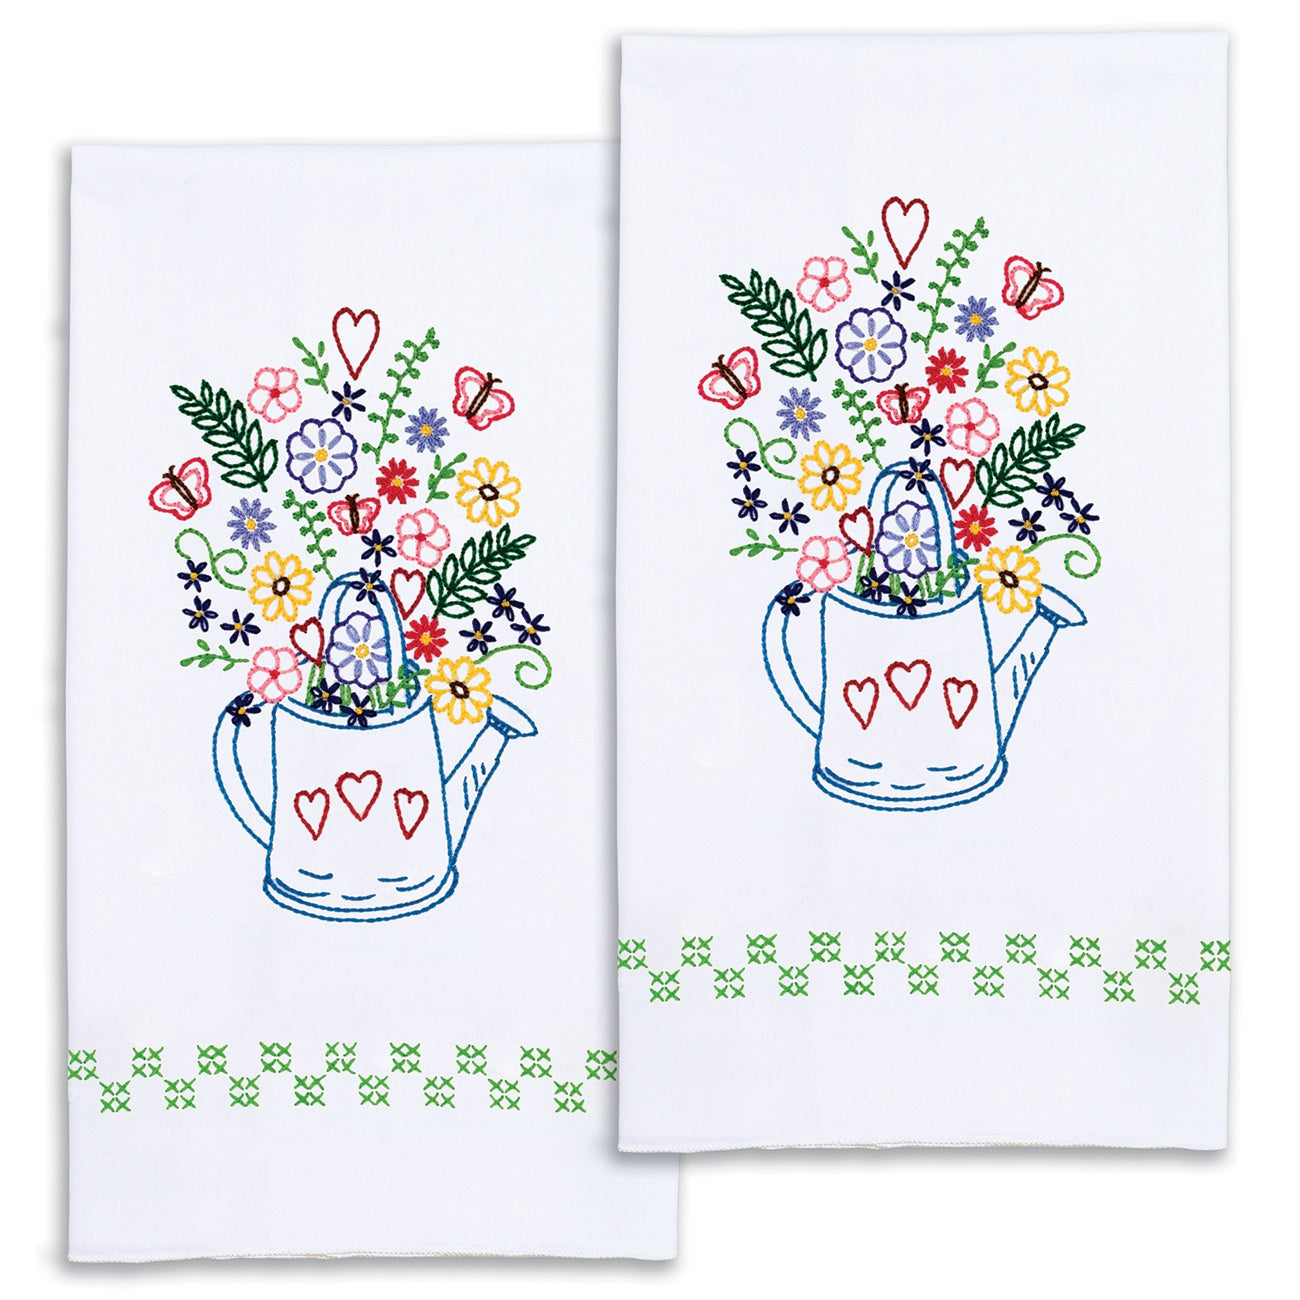 DIY Dempsey Watering Can Flowers Stamped Embroidery Guest Hand Towel Kit